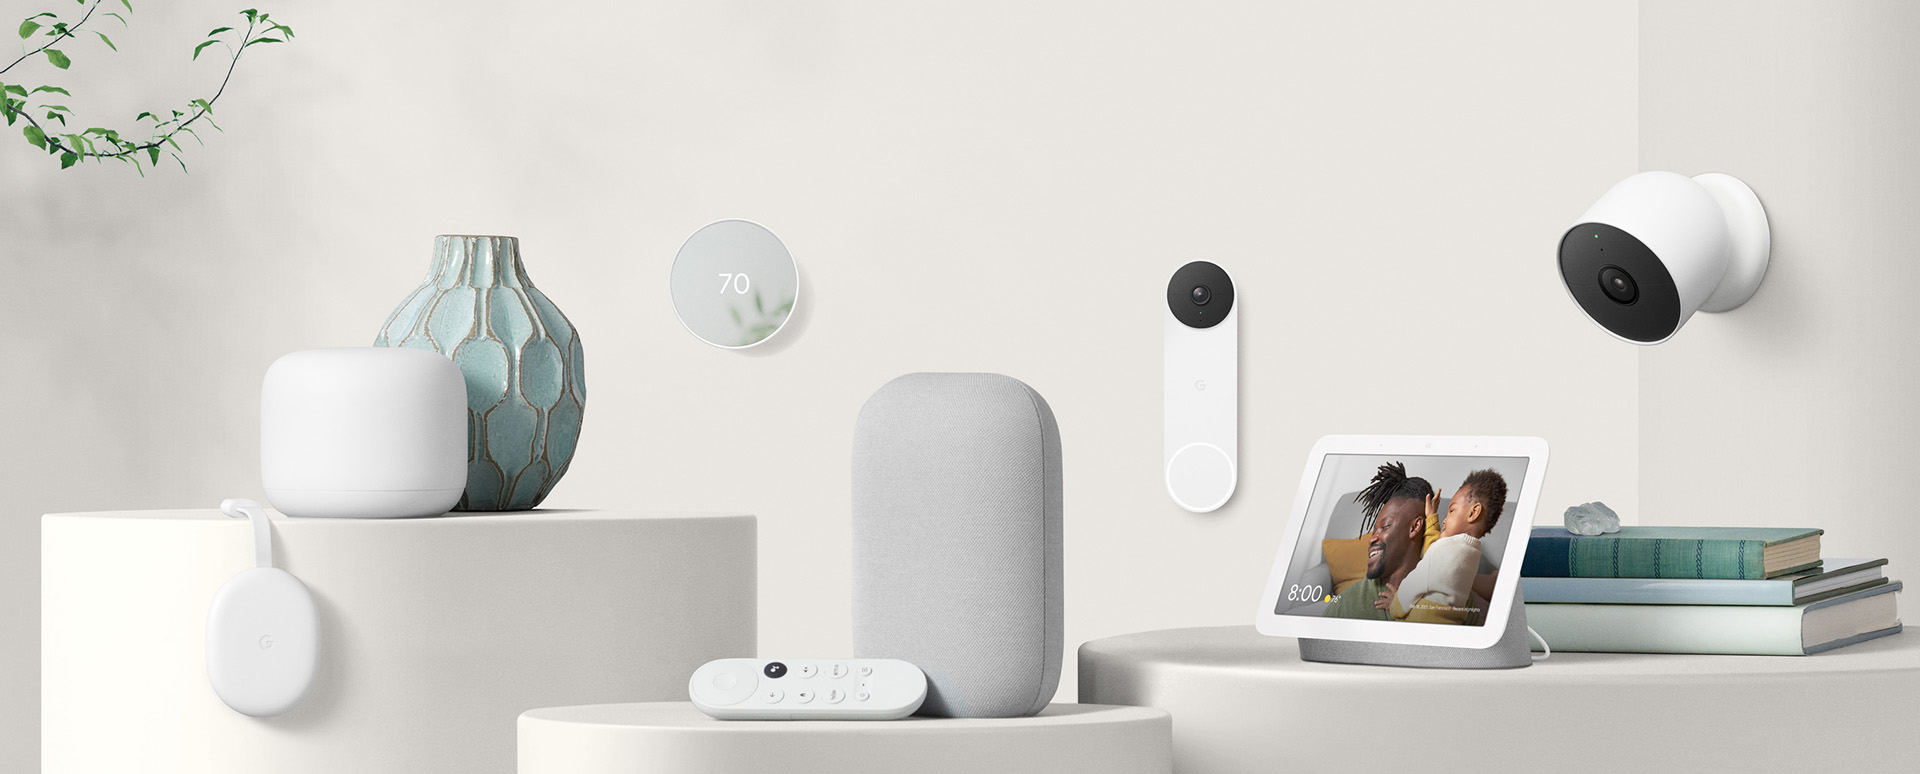 Welcome to Google Nest.